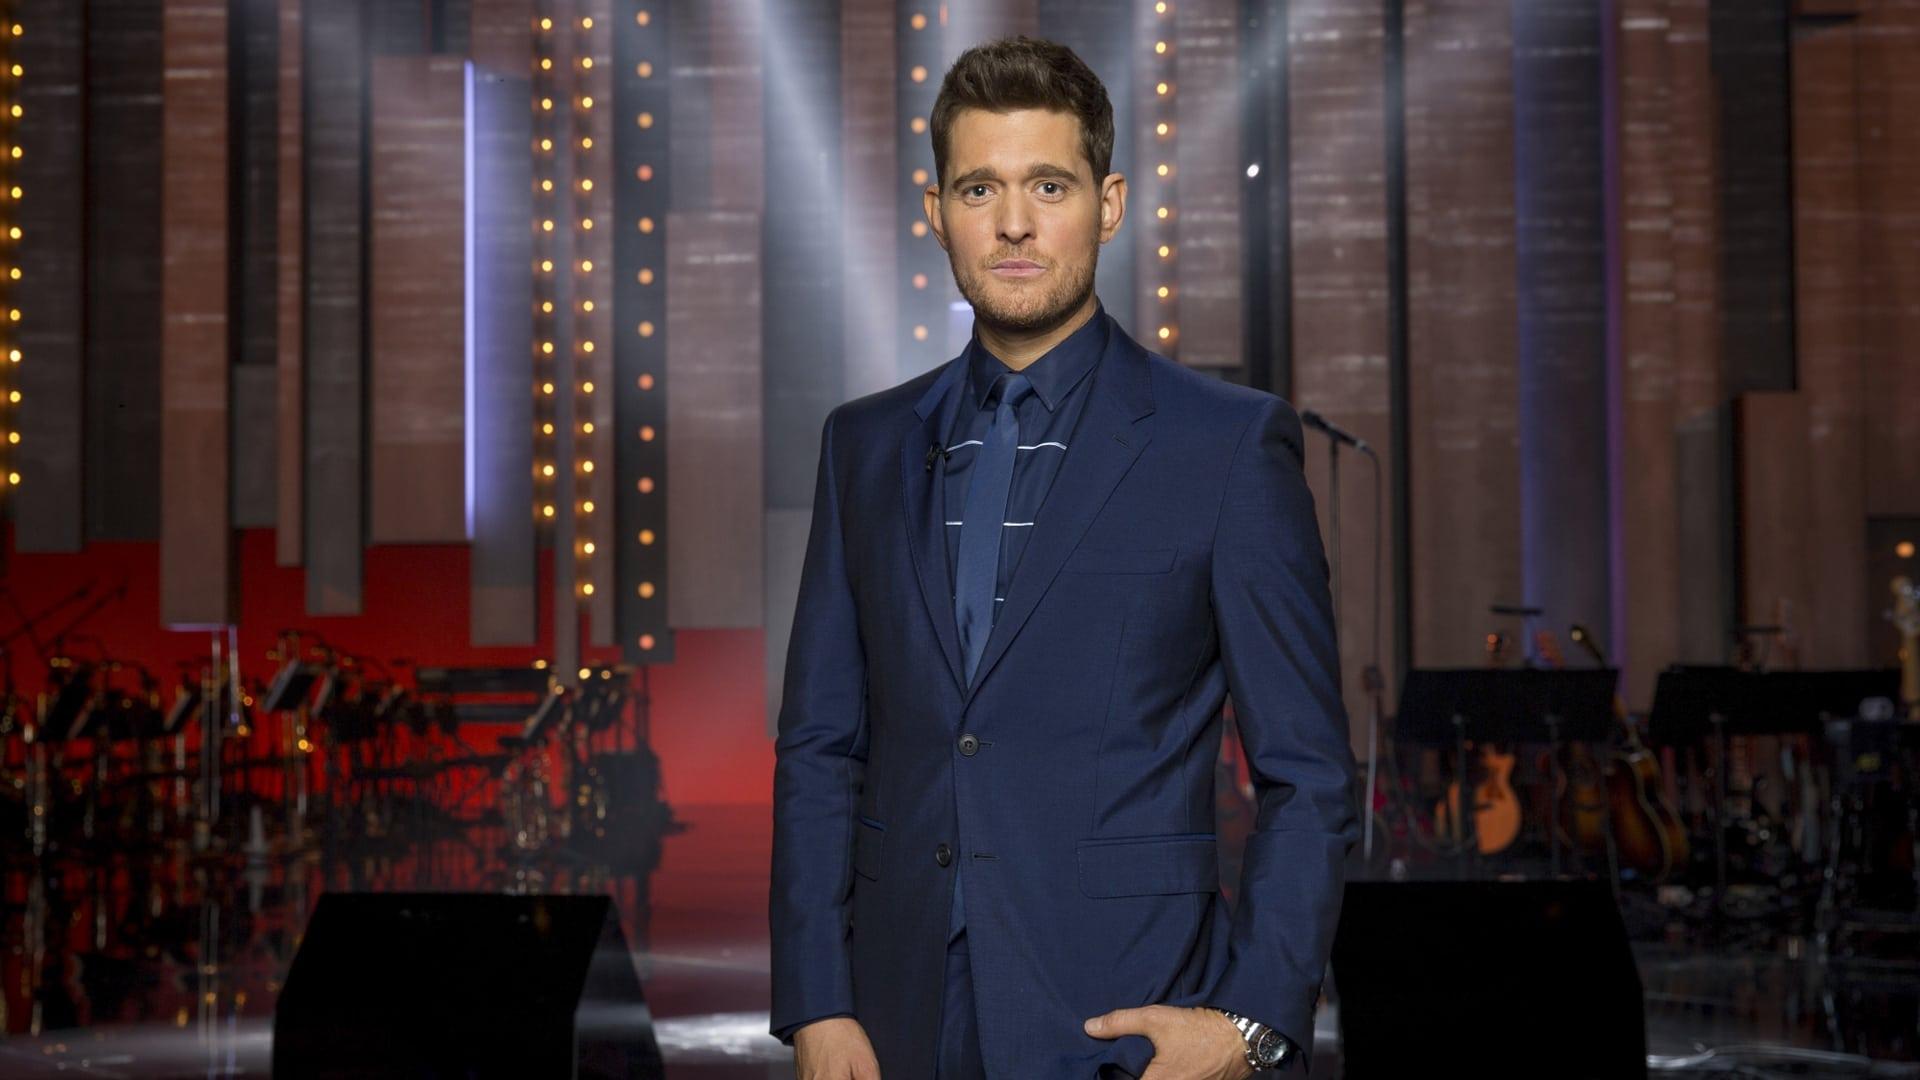 Michael Bublé at the BBC backdrop